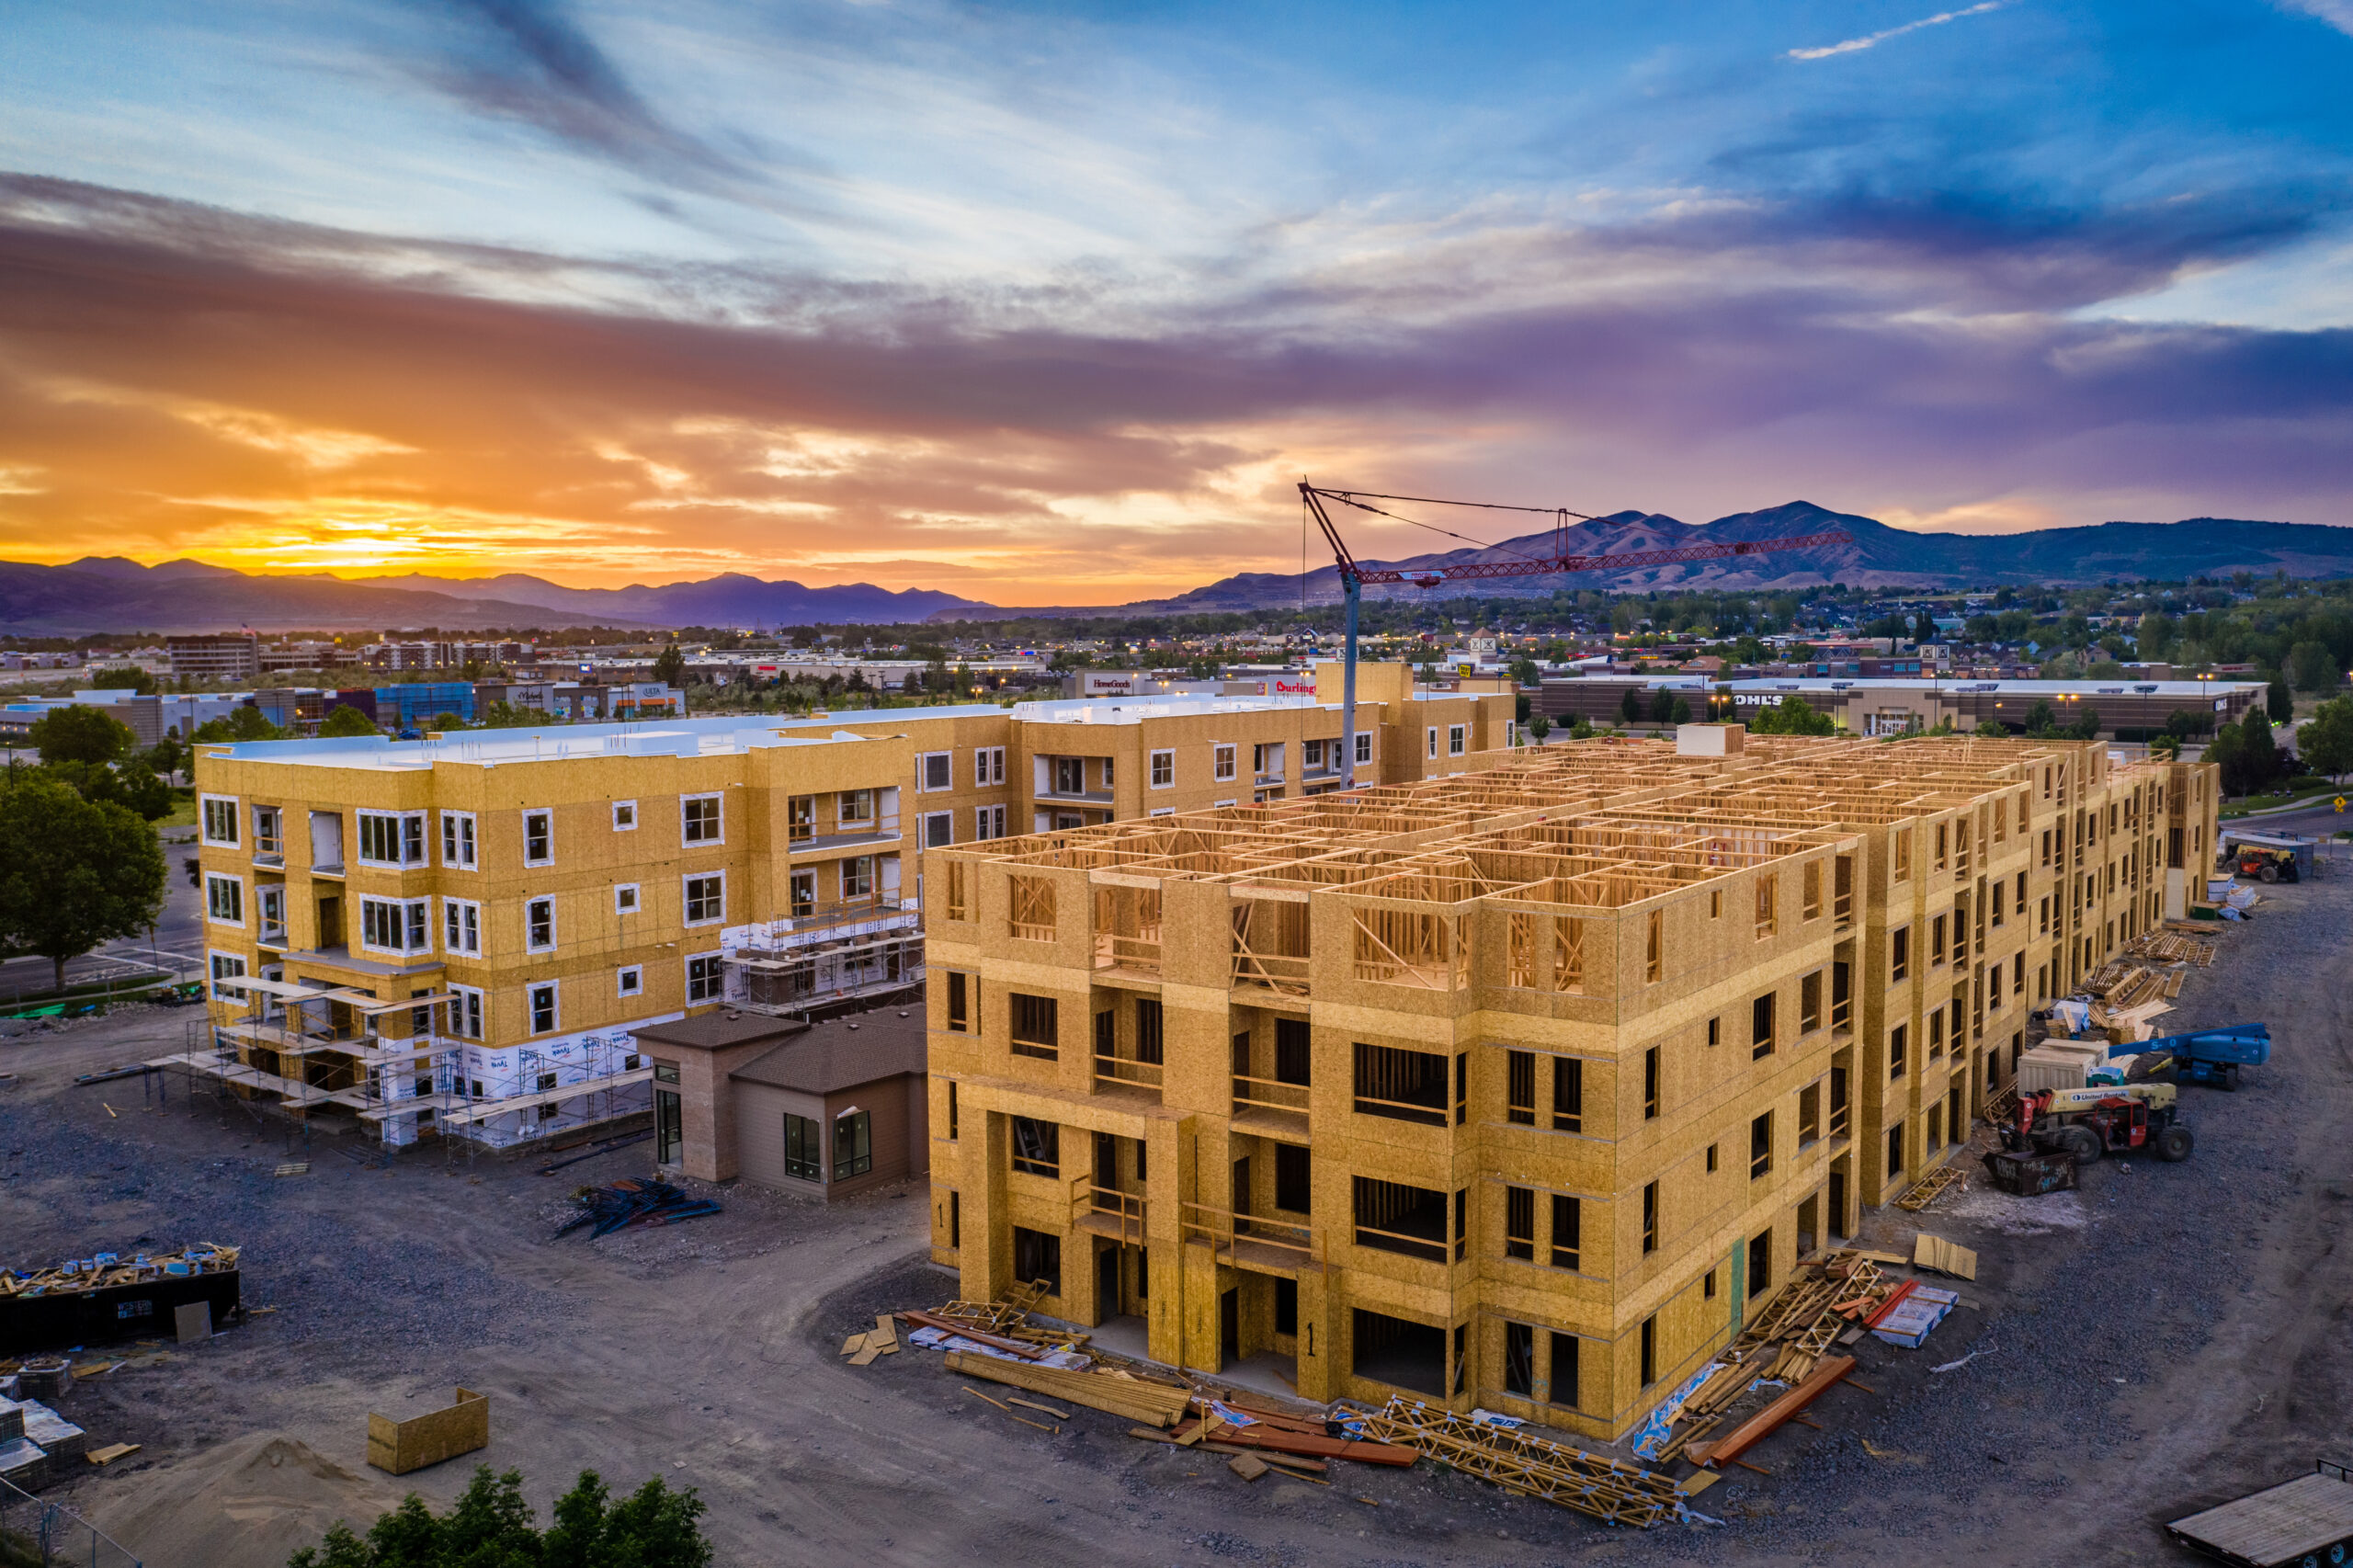 Utah’s booming economy, increasing population and lack of residential construction are amplifying the need for multifamily housing options.